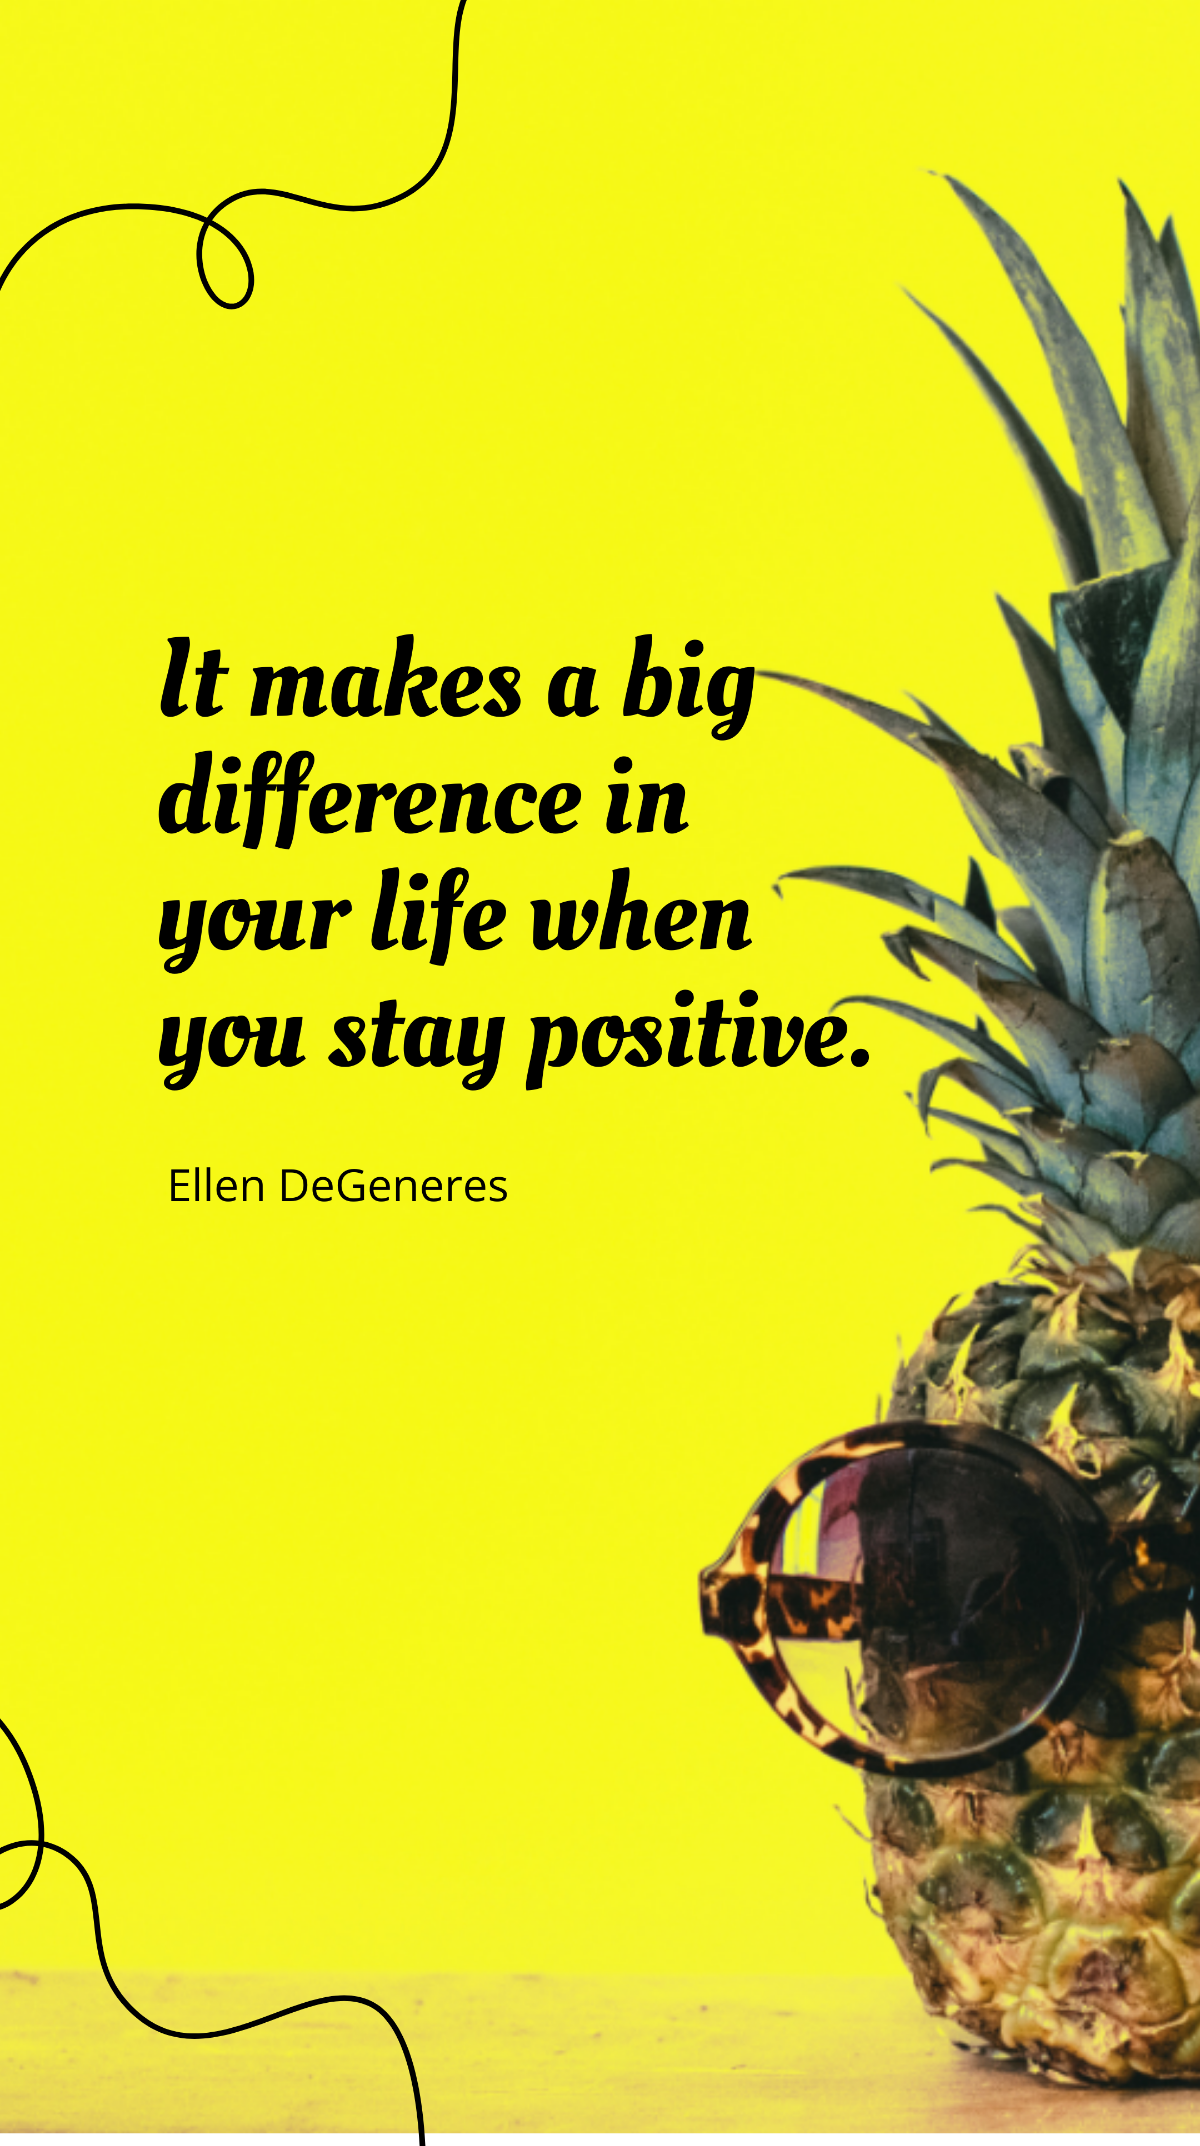 Ellen DeGeneres - It makes a big difference in your life when you stay positive. Template